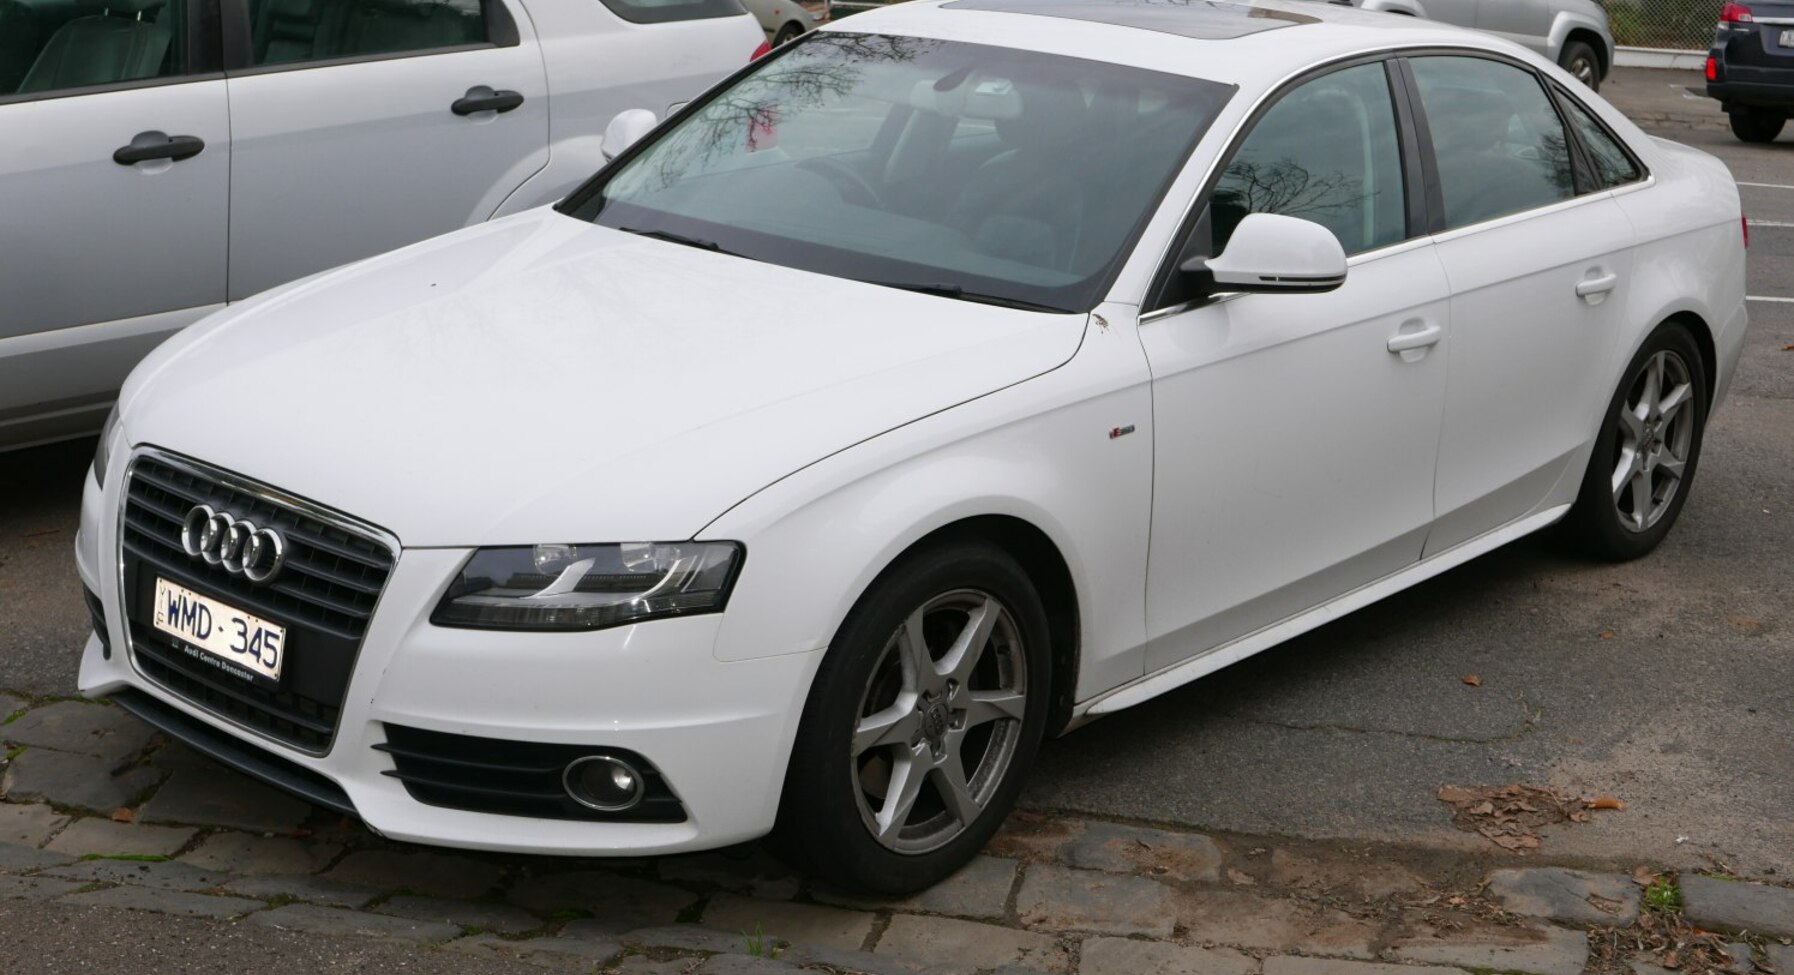 Audi A4 (B8 8K) 2.0 TDI (143 Hp) Multitronic 2007, 2008, 2009, 2010, 2011  specifications, prices & reviews